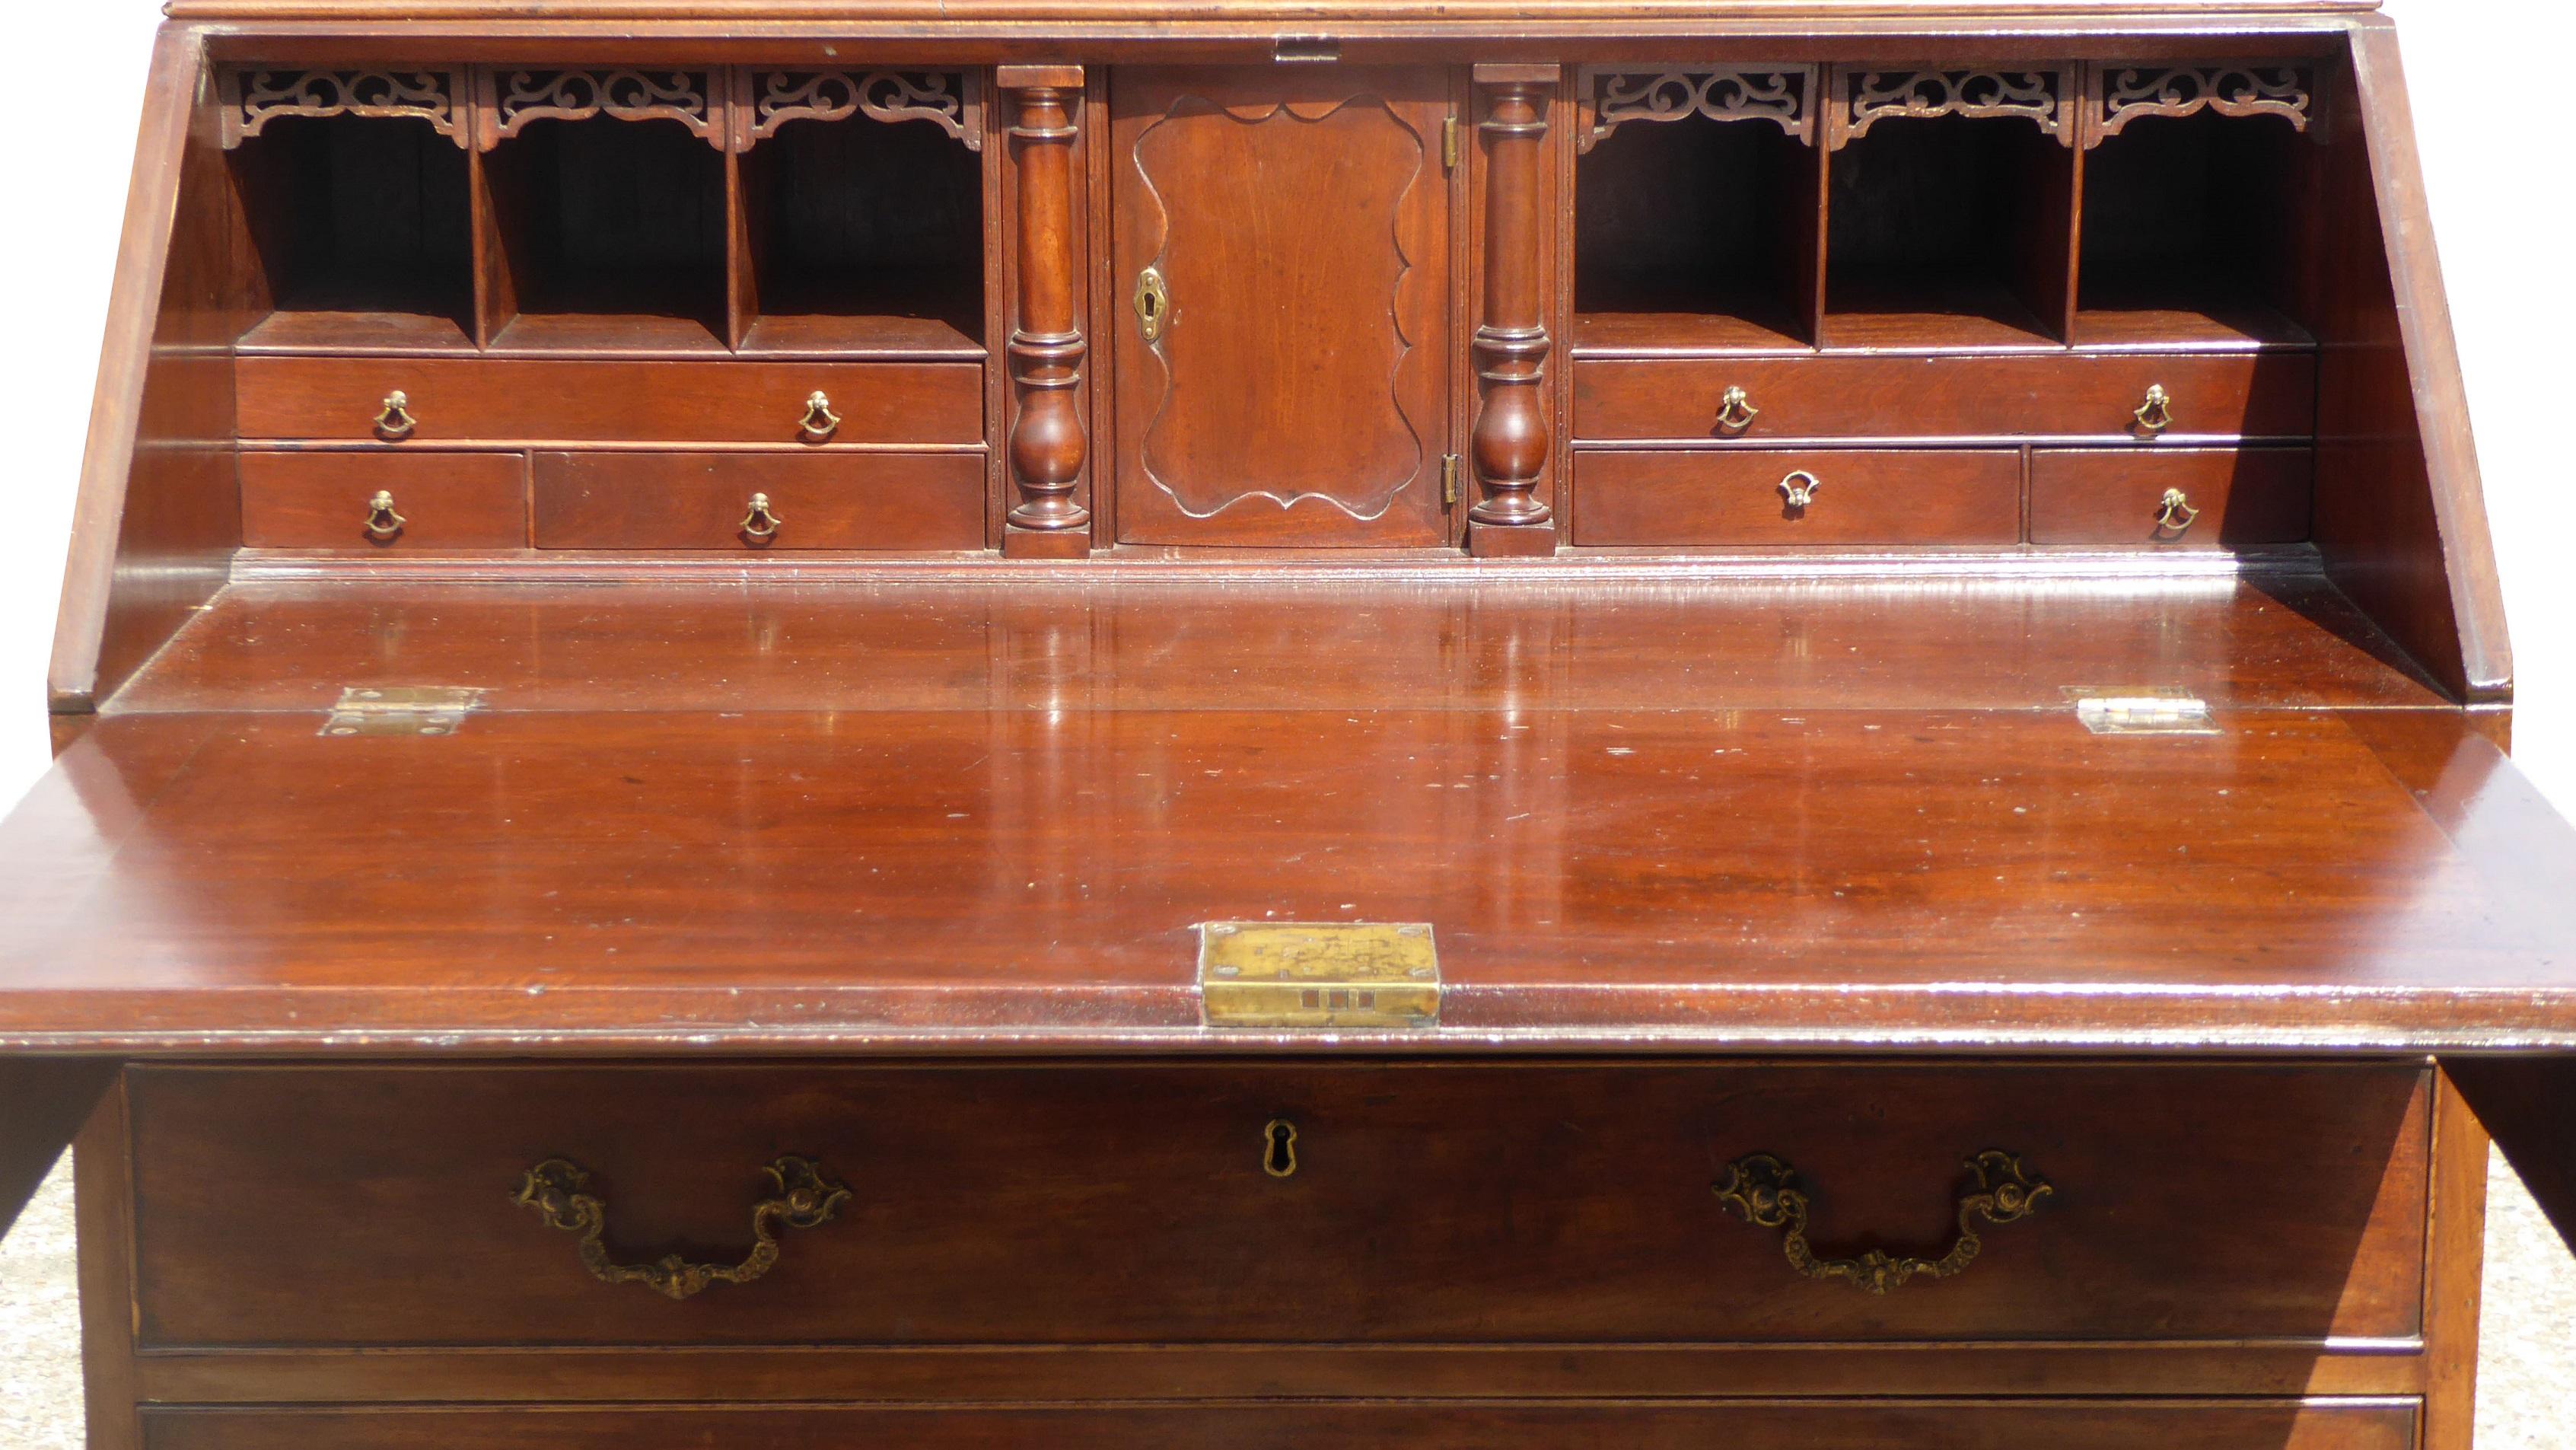 For sale is a good quality George III Mahogany Bureau Bookcase. The top of the bookcase has an ornate pediment above two glazed doors, opening to reveal adjustable shelves. Below this is the bureau section, with the fall front opening to reveal a